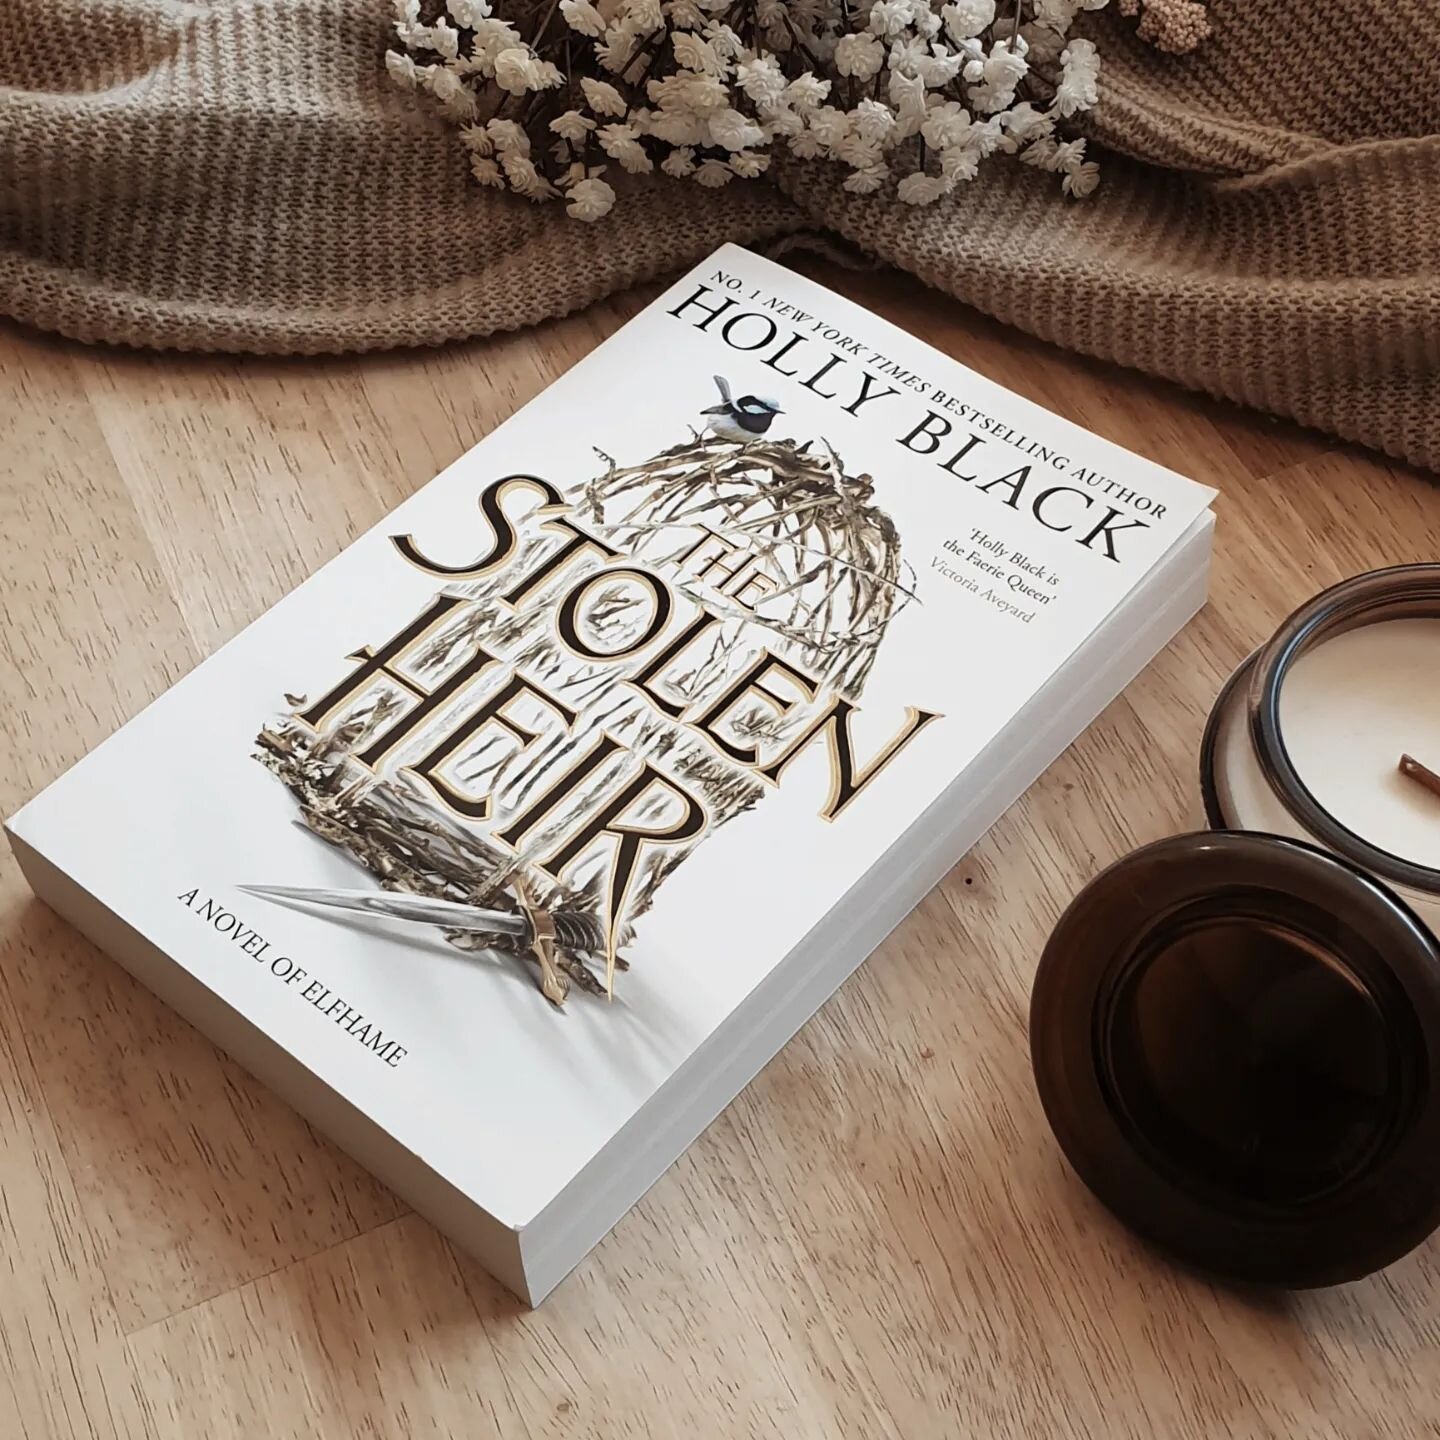 Happy Saturday, everyone! What are you reading this weekend? 📚

I finished THE STOLEN HEIR last night and absolutely loved it - then raged a bit when I realised the sequel isn't out until February next year 😭

We've been back home for a week now, b